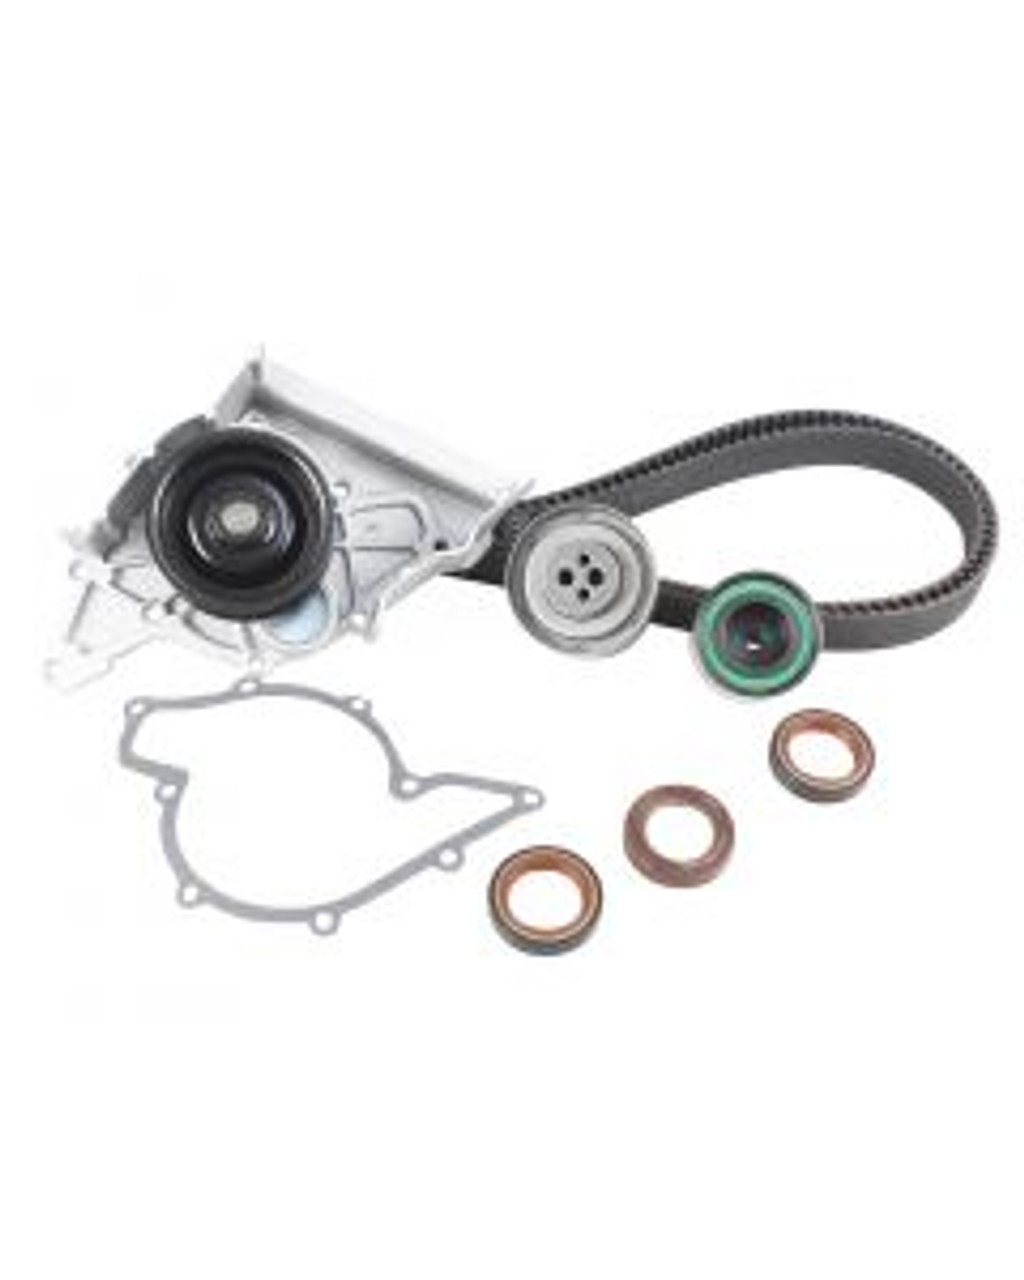 Timing Belt Kit with Water Pump 2.8L 1998 Audi Cabriolet - TBK806WP.17